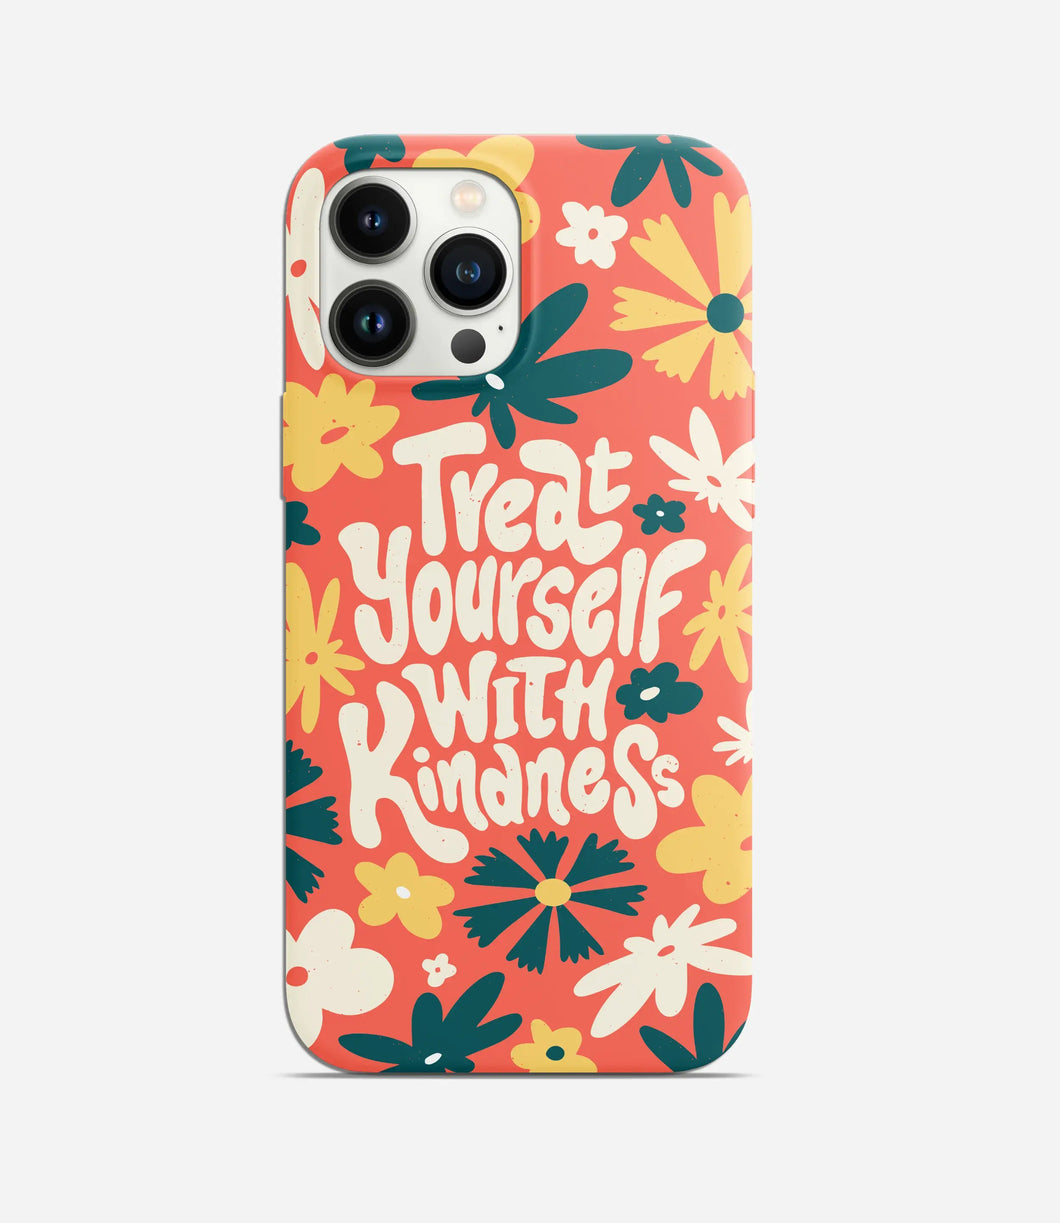 Treat Yourself with Kindness Phone Case